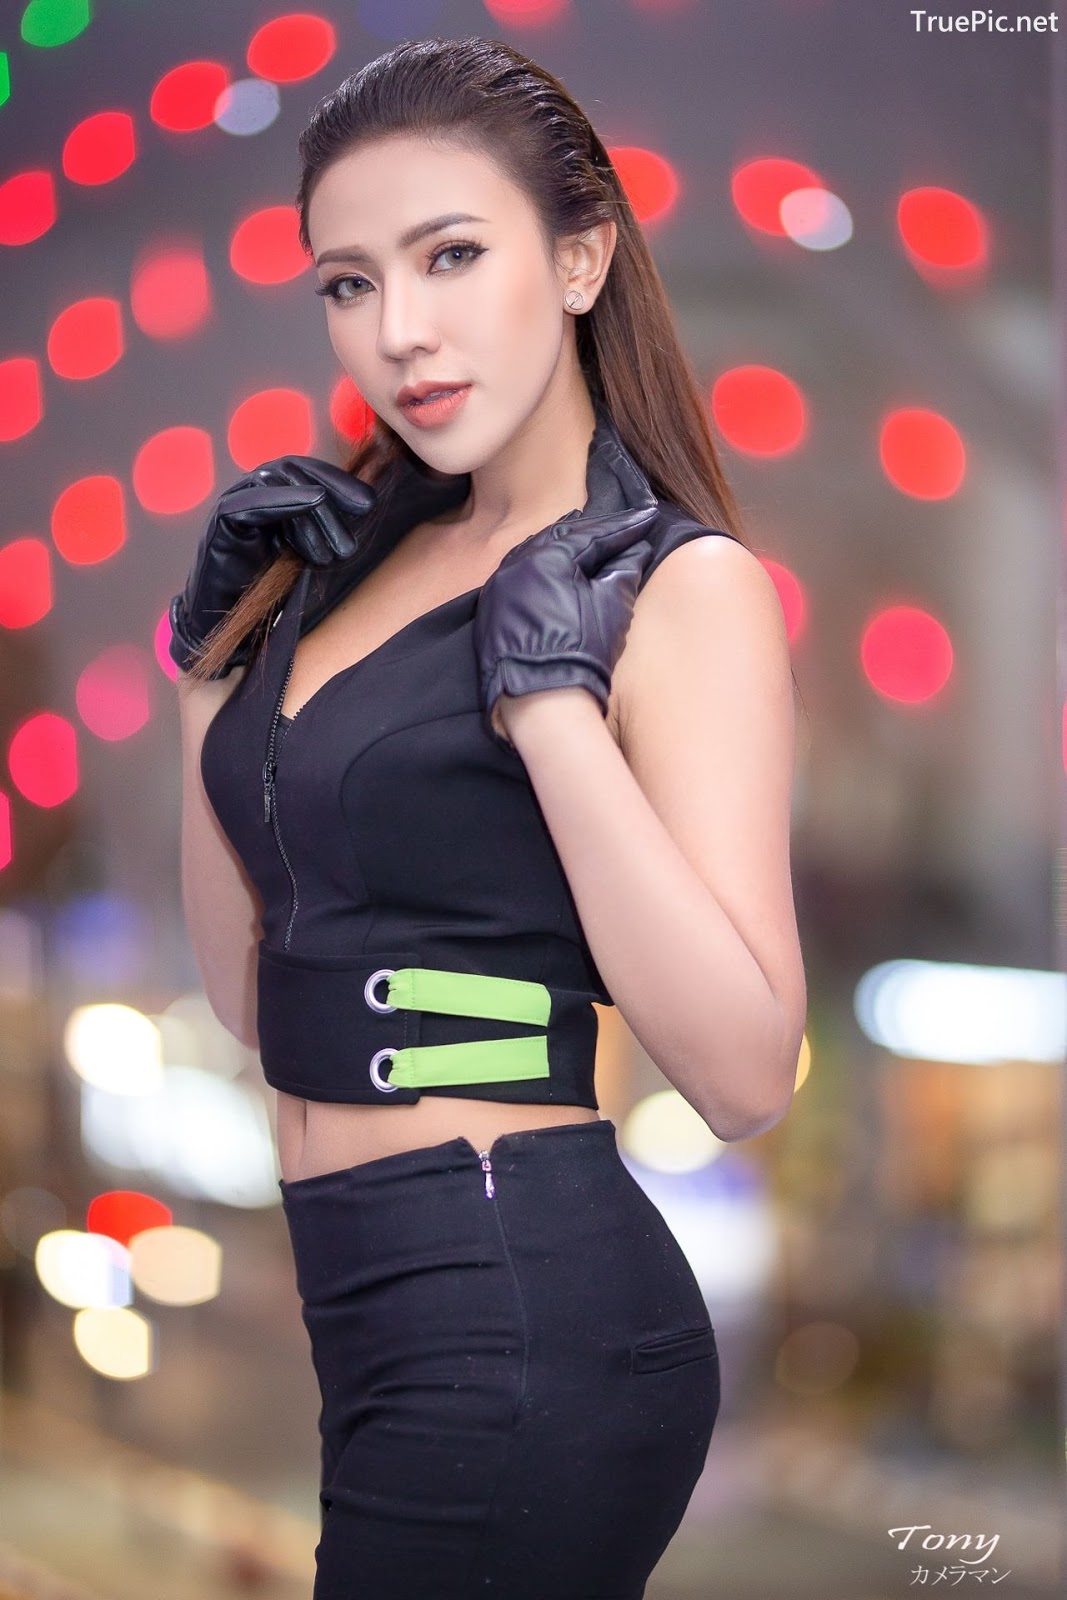 Image-Thailand-Hot-Model-Thai-Racing-Girl-At-Motor-Expo-2019-TruePic.net- Picture-25